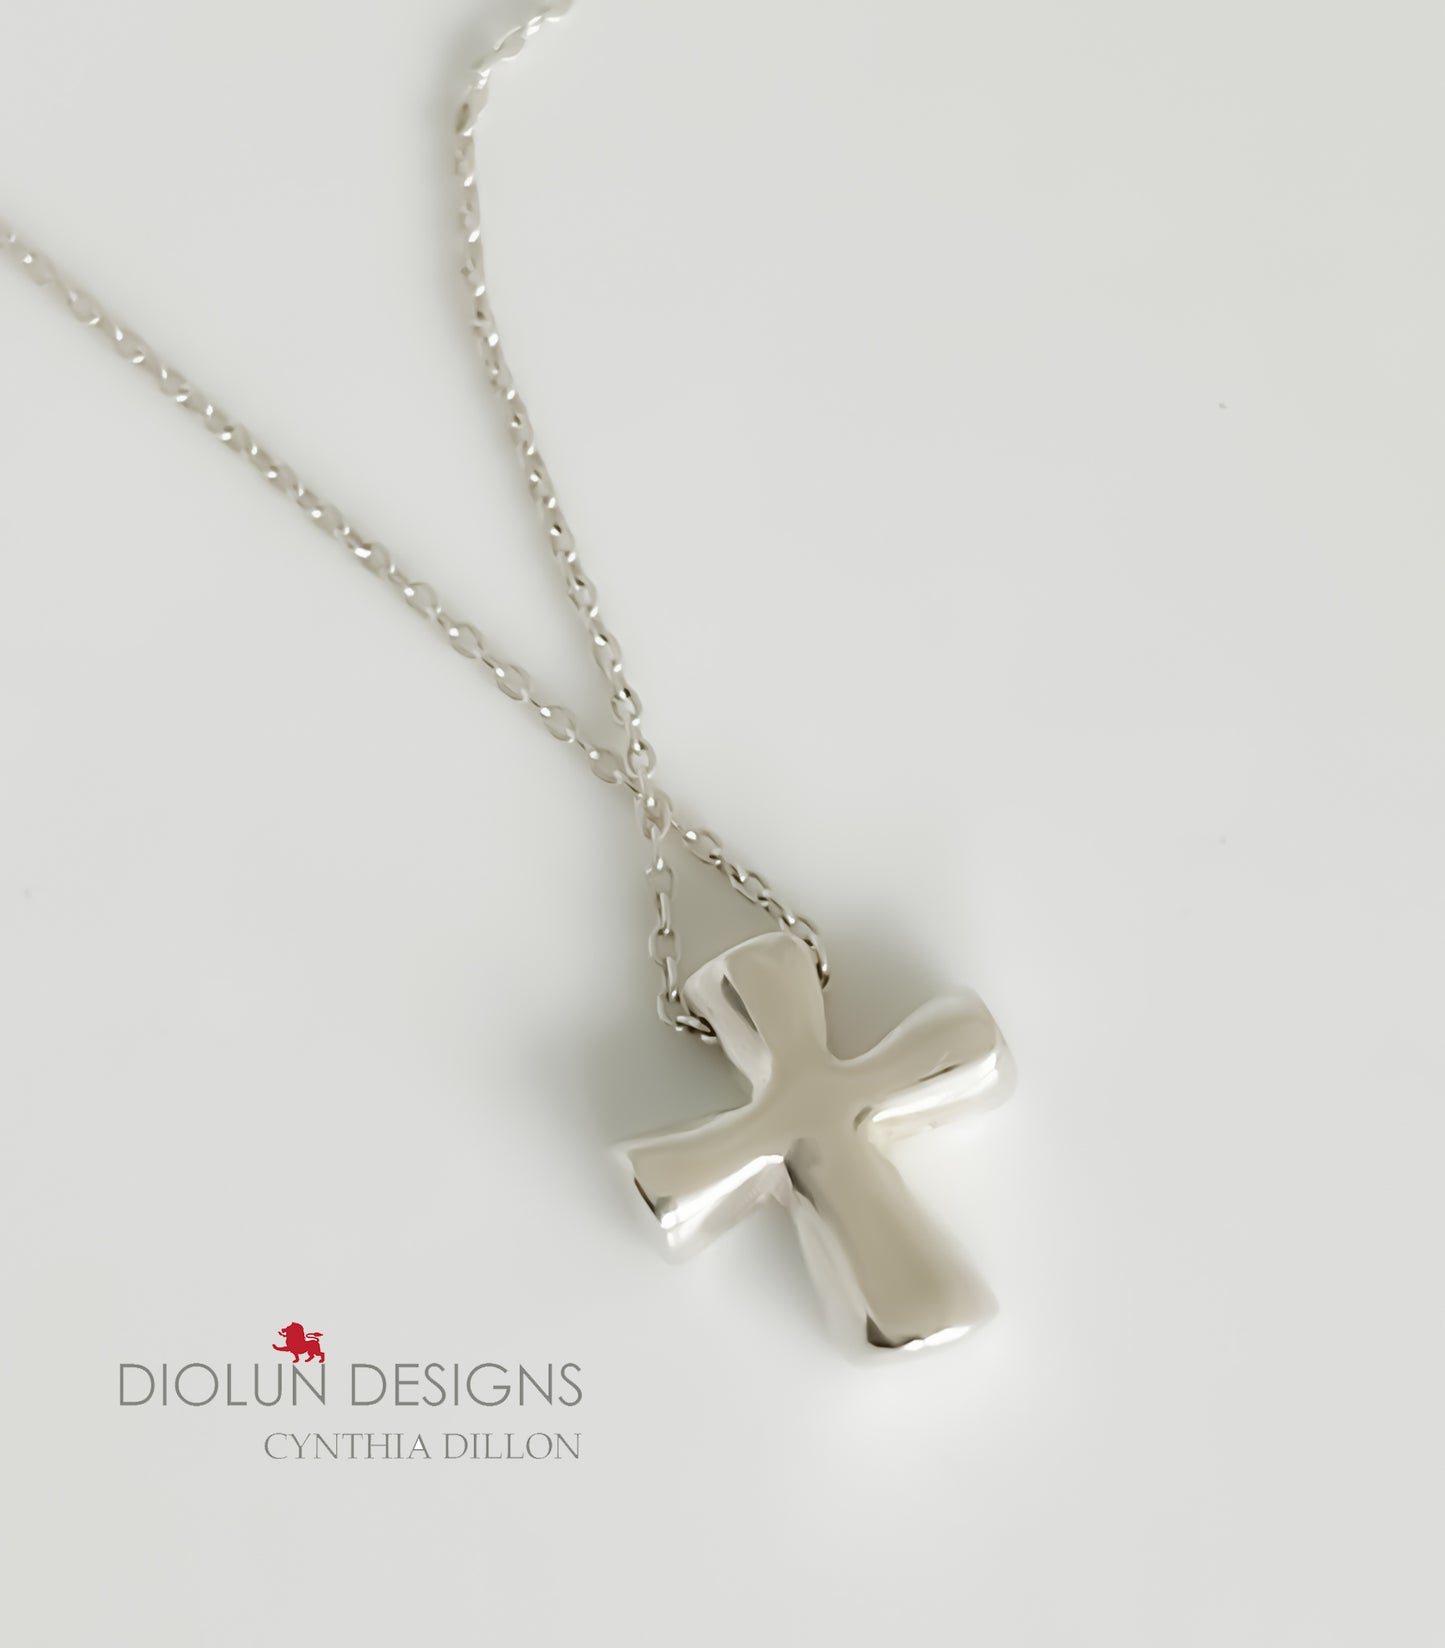 Pendant - Sculpted  "Solid Little Cross" in S/S w. 16" Chain.